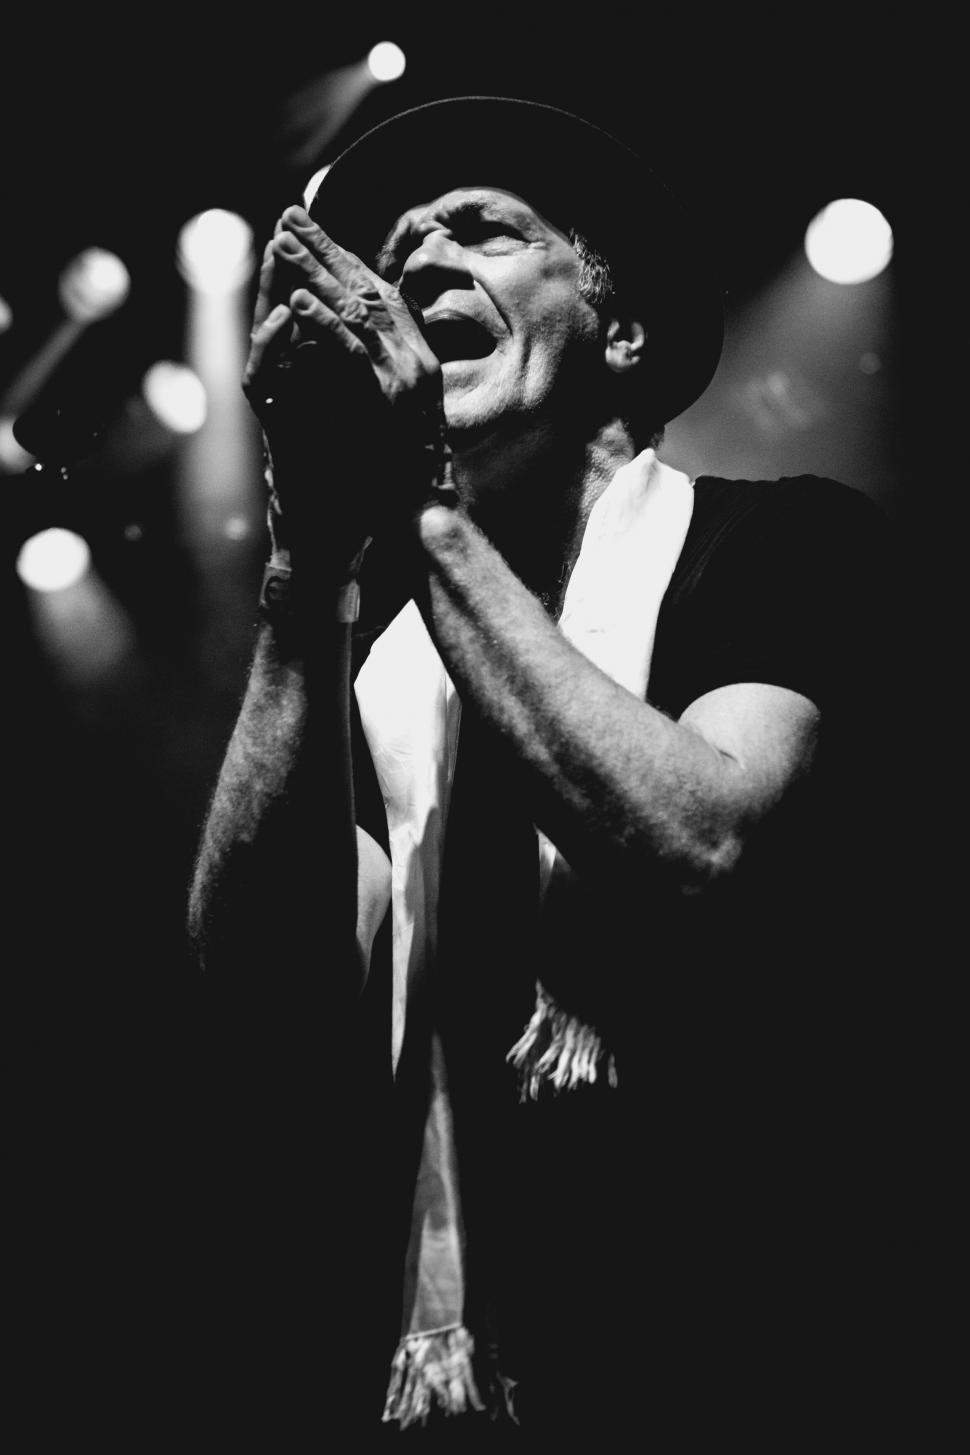 Free Image of A man singing into a microphone 